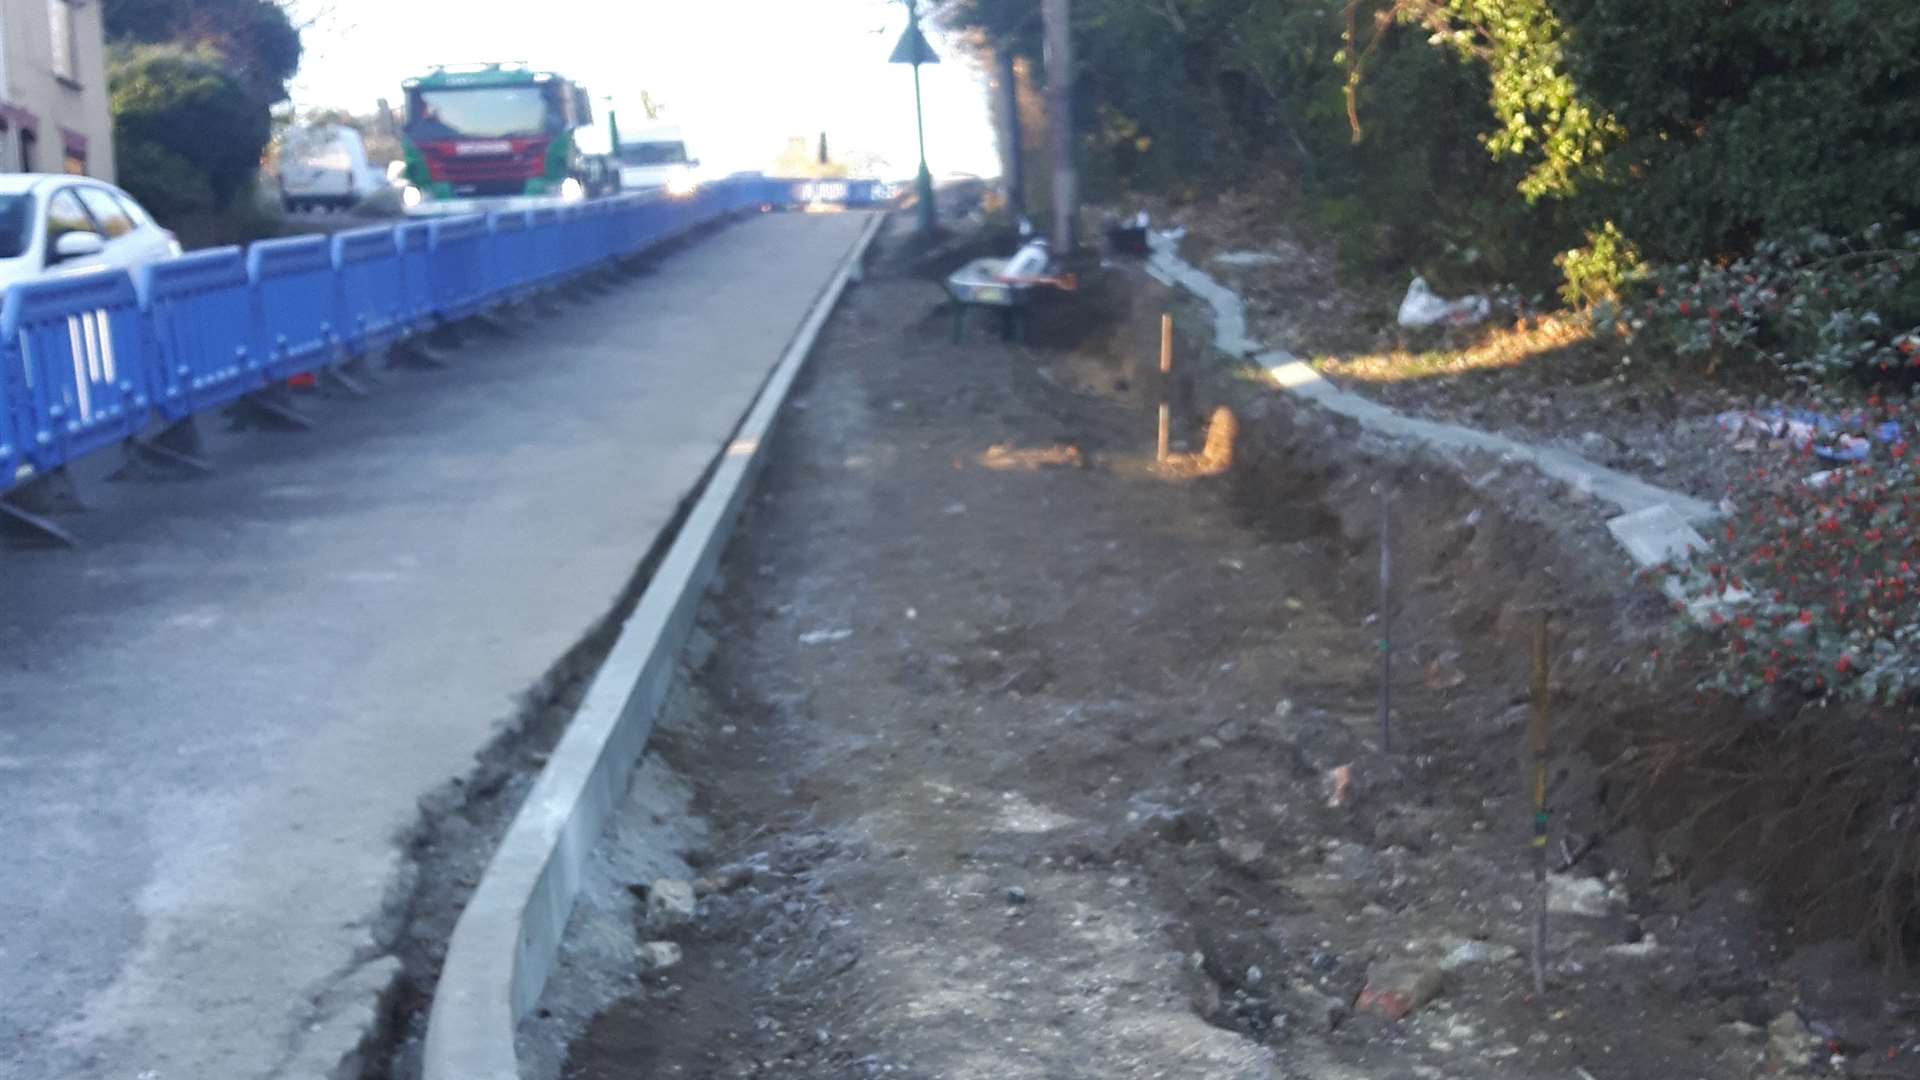 The footpath under construction